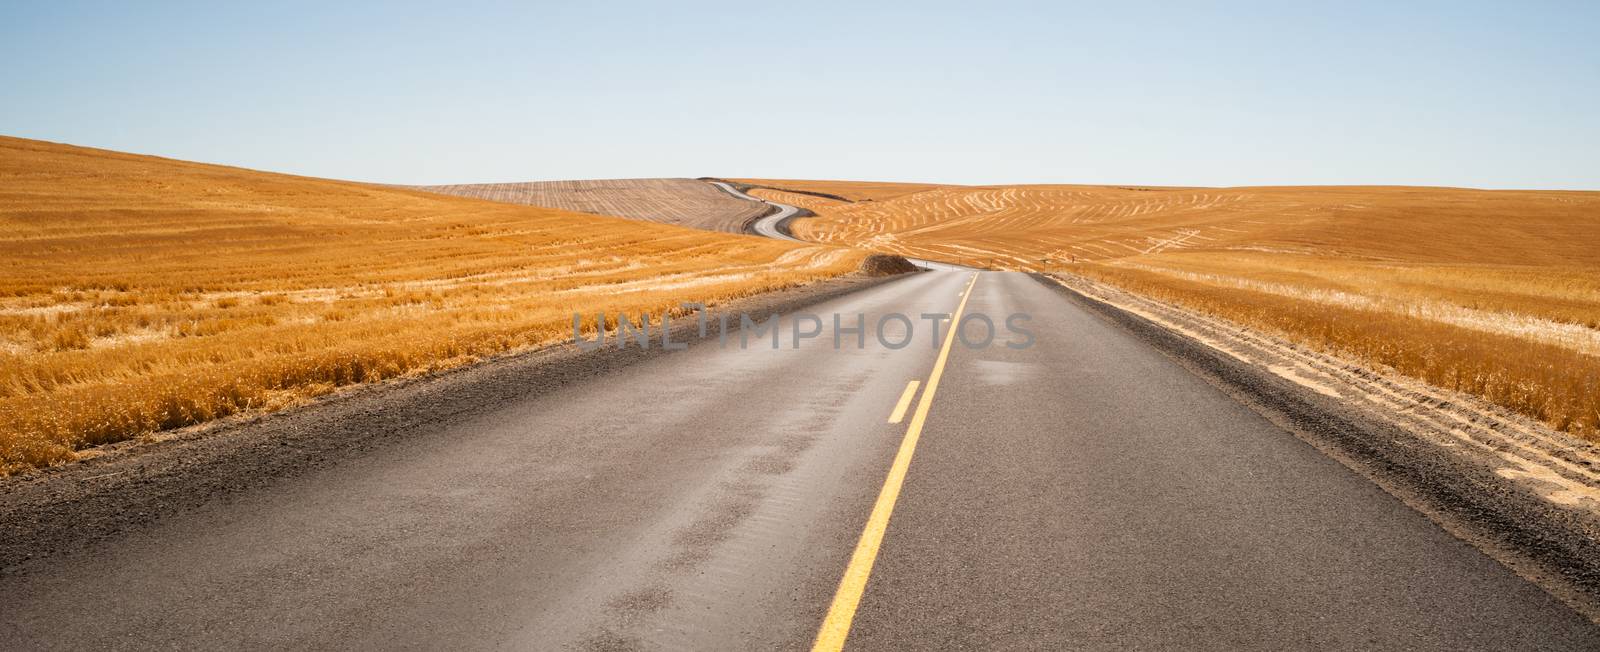 Open Road Two Lane Highway Oregon Landscape Harvested Farmland by ChrisBoswell